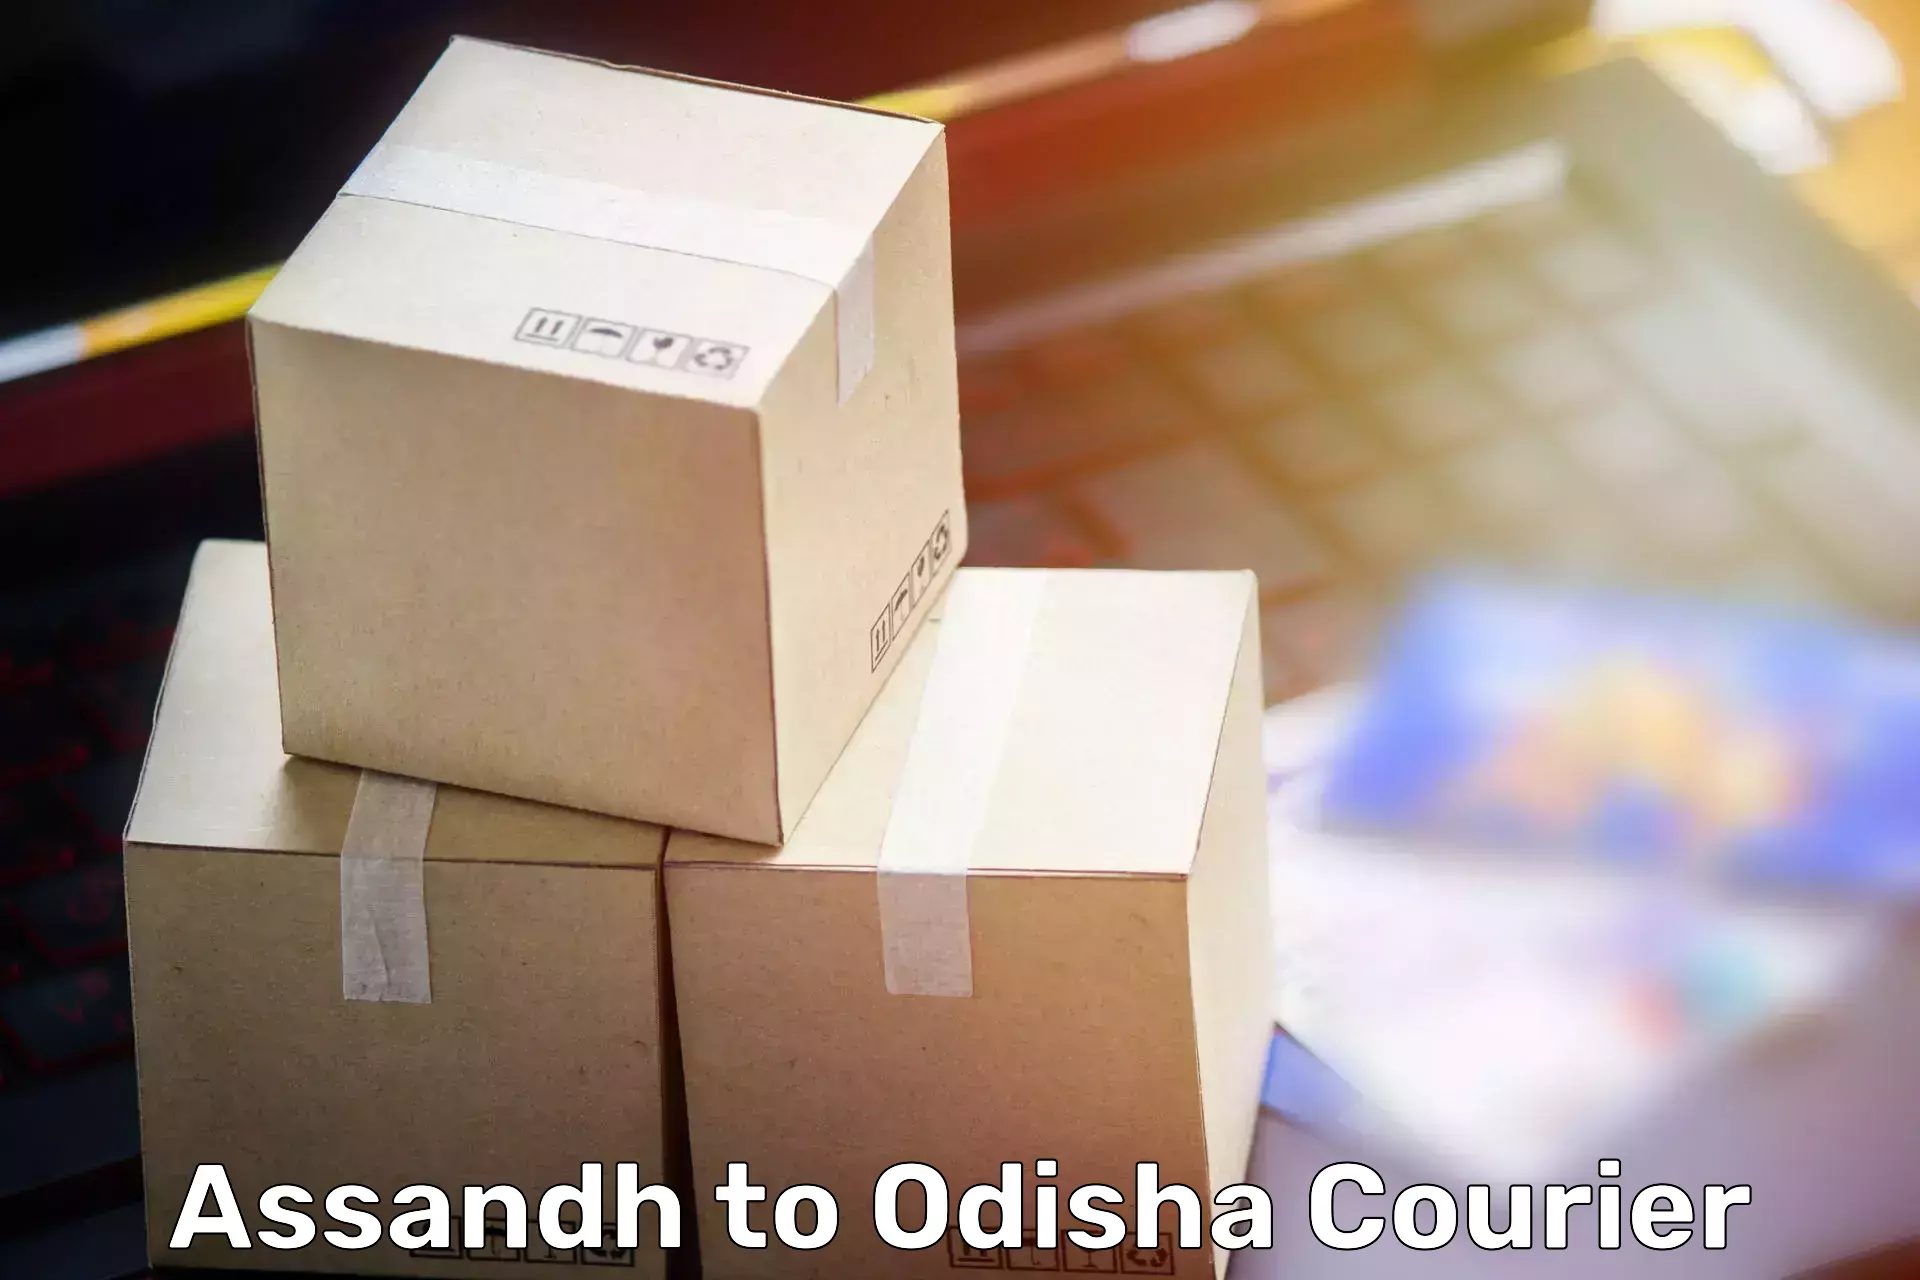 Furniture delivery service Assandh to Sohela